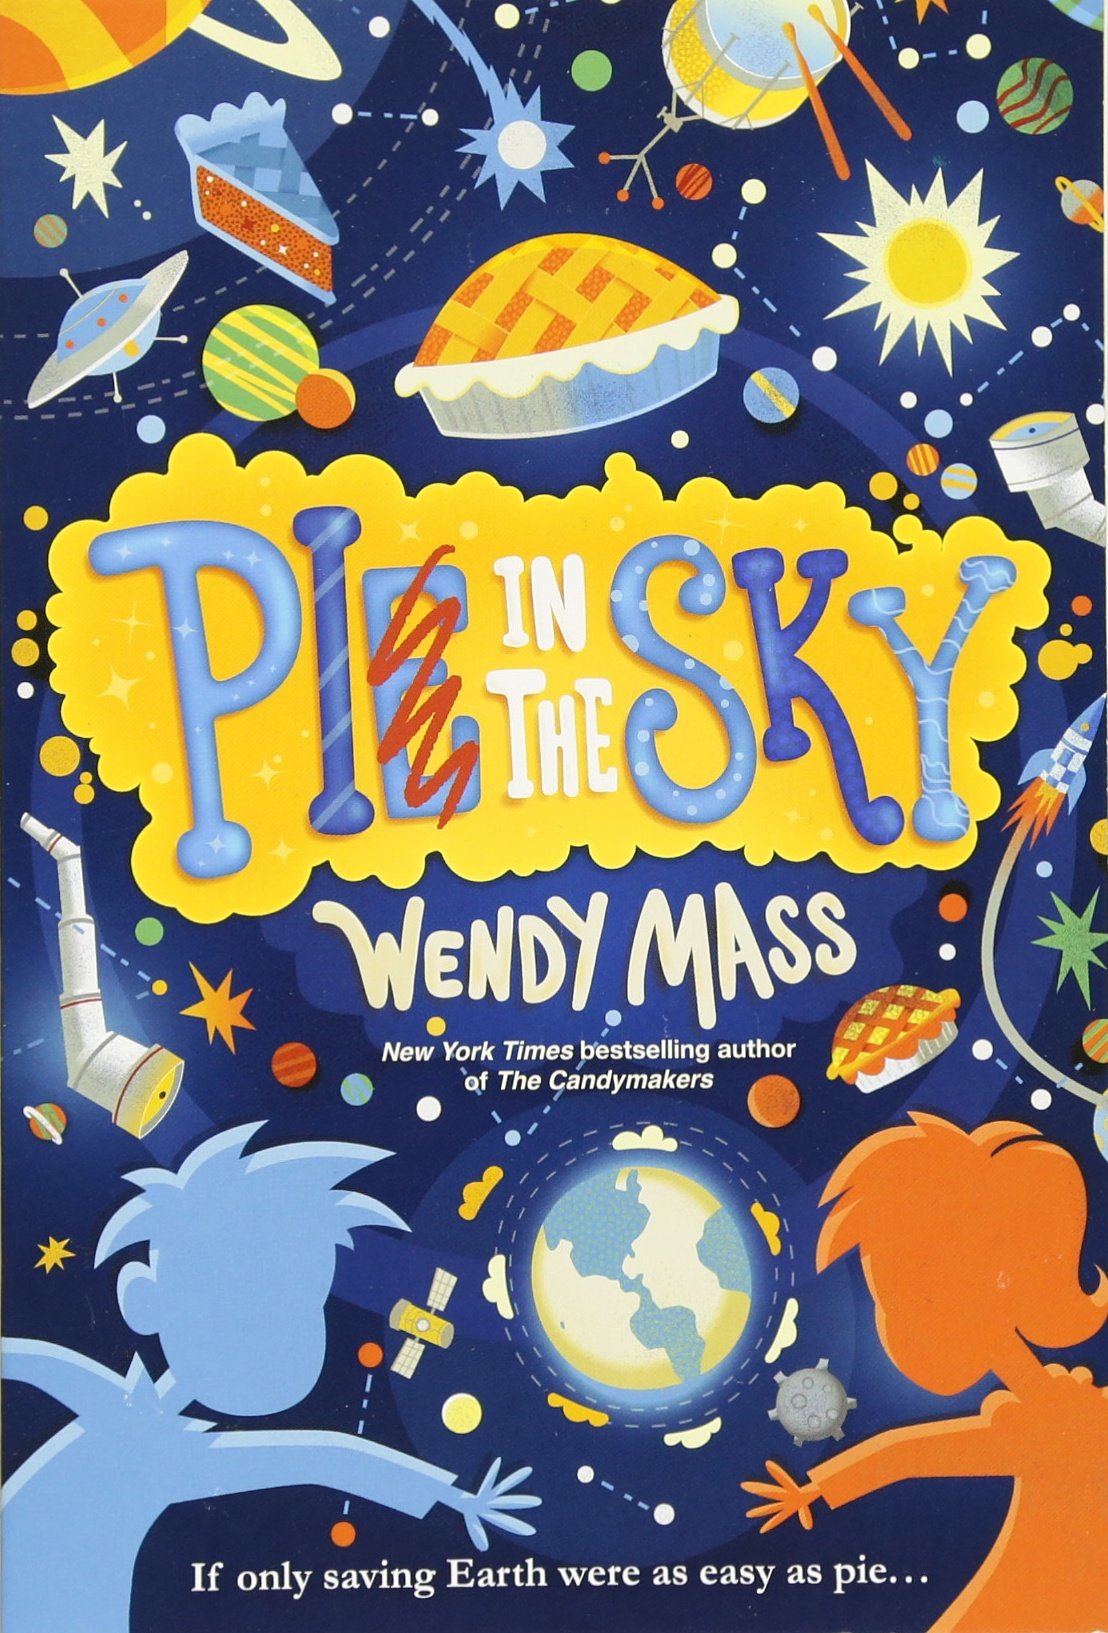 Pi in the Sky by Wendy Mass